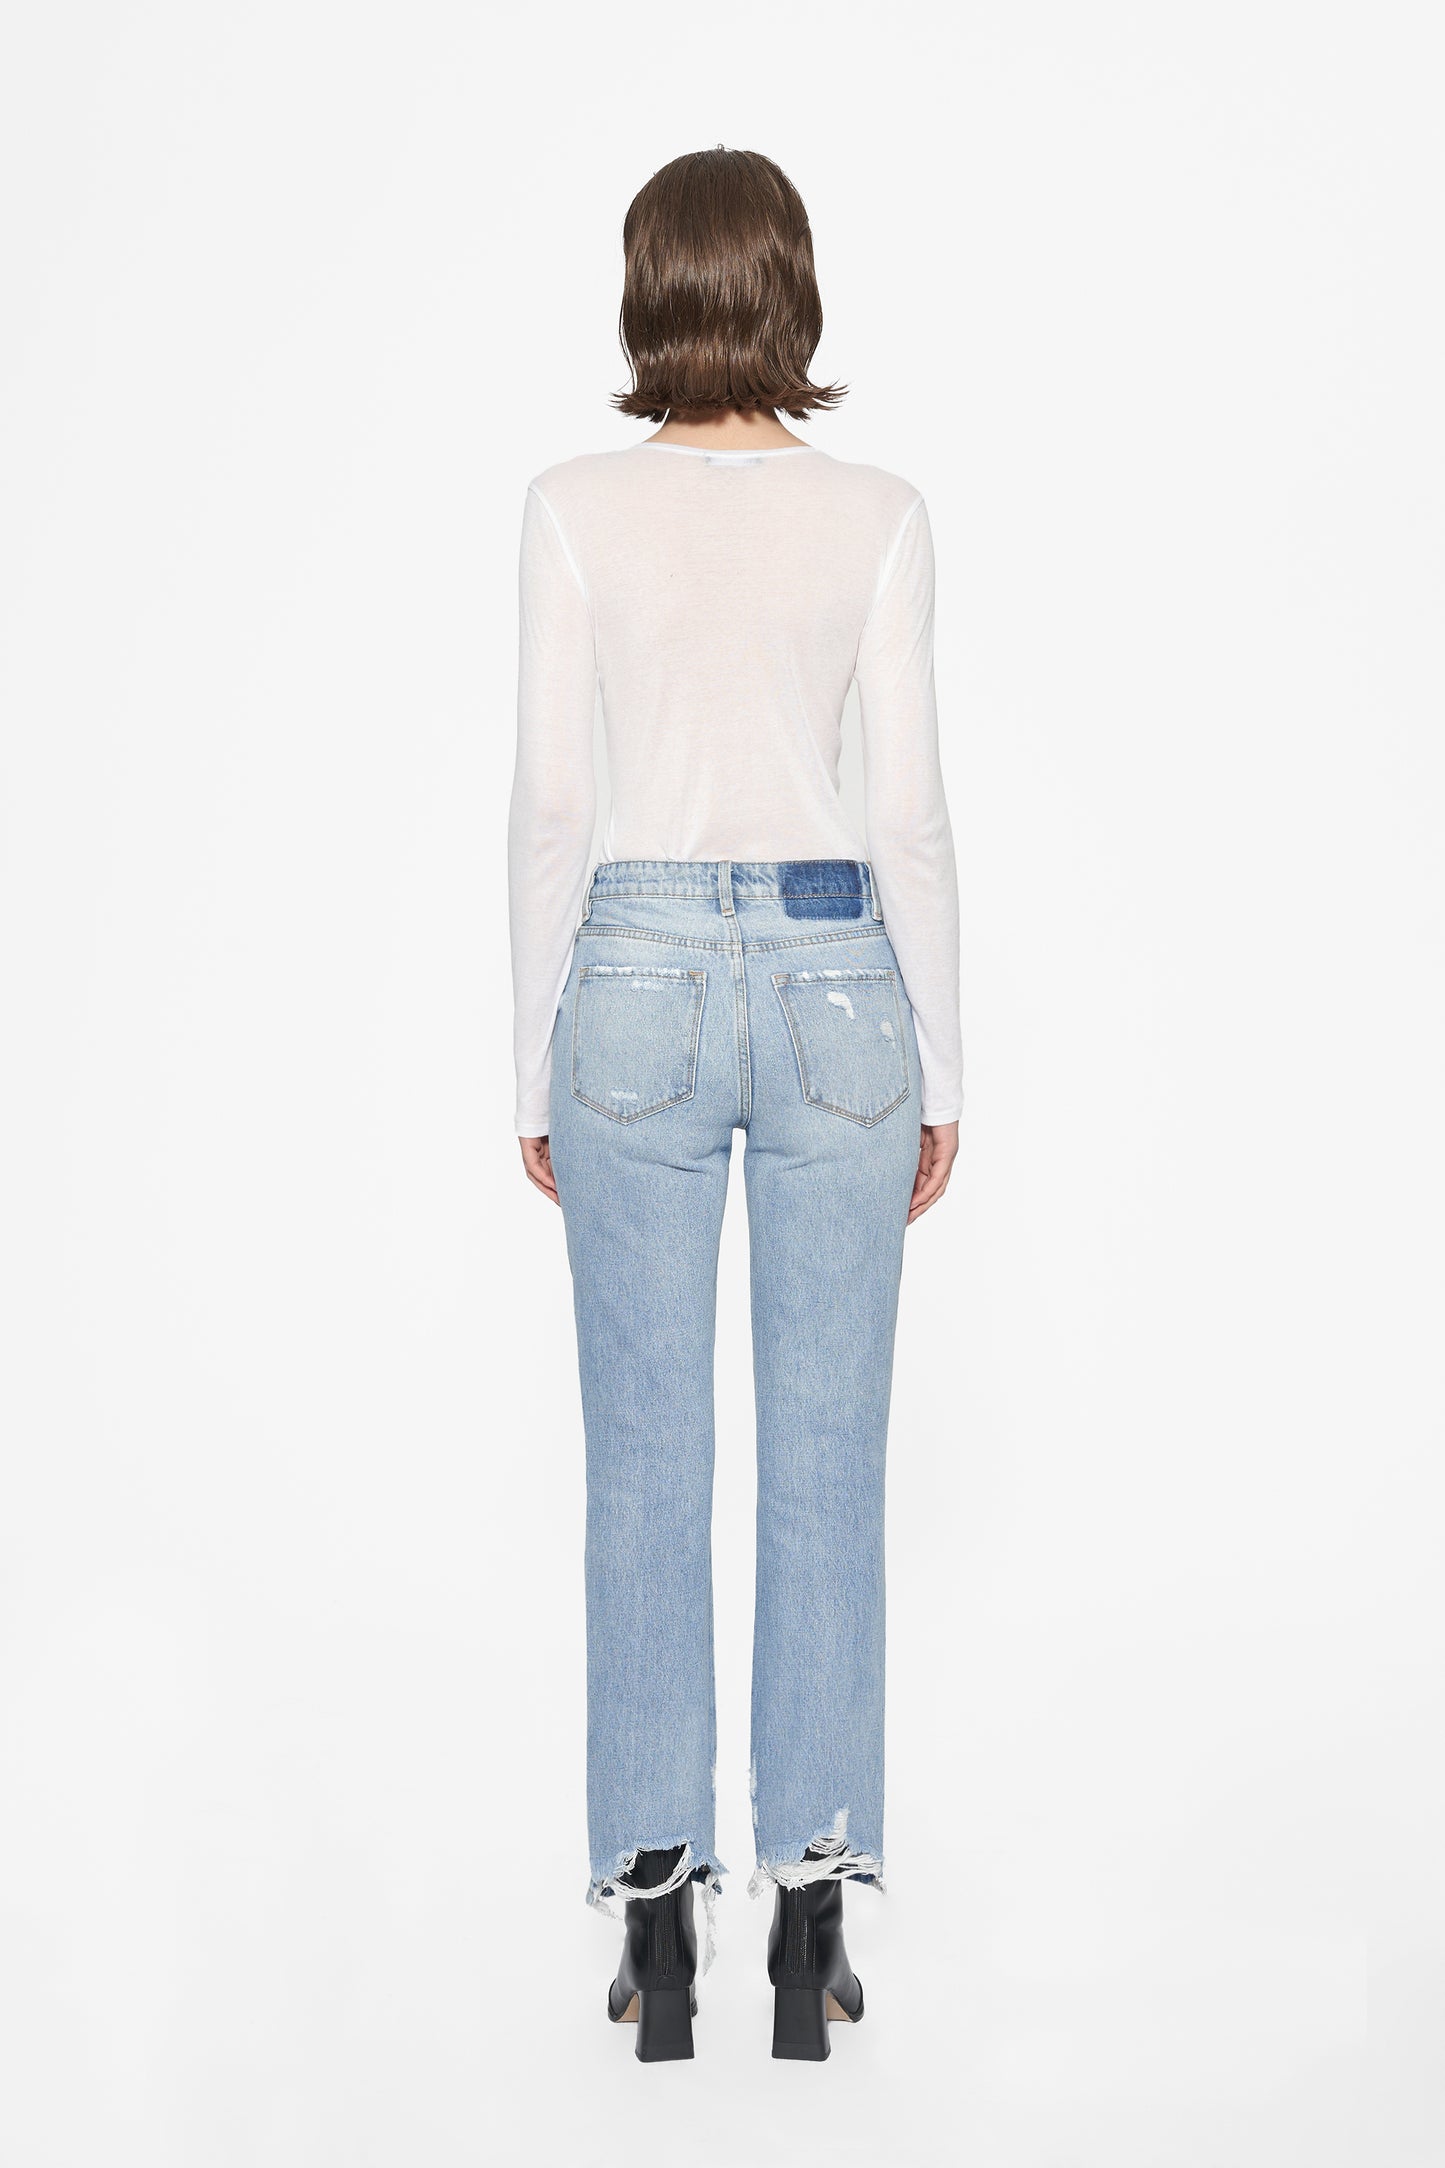 CHRISTINE HIGH RISE DISTRESSED MOM JEANS BYM3063 (4376S) OCEAN